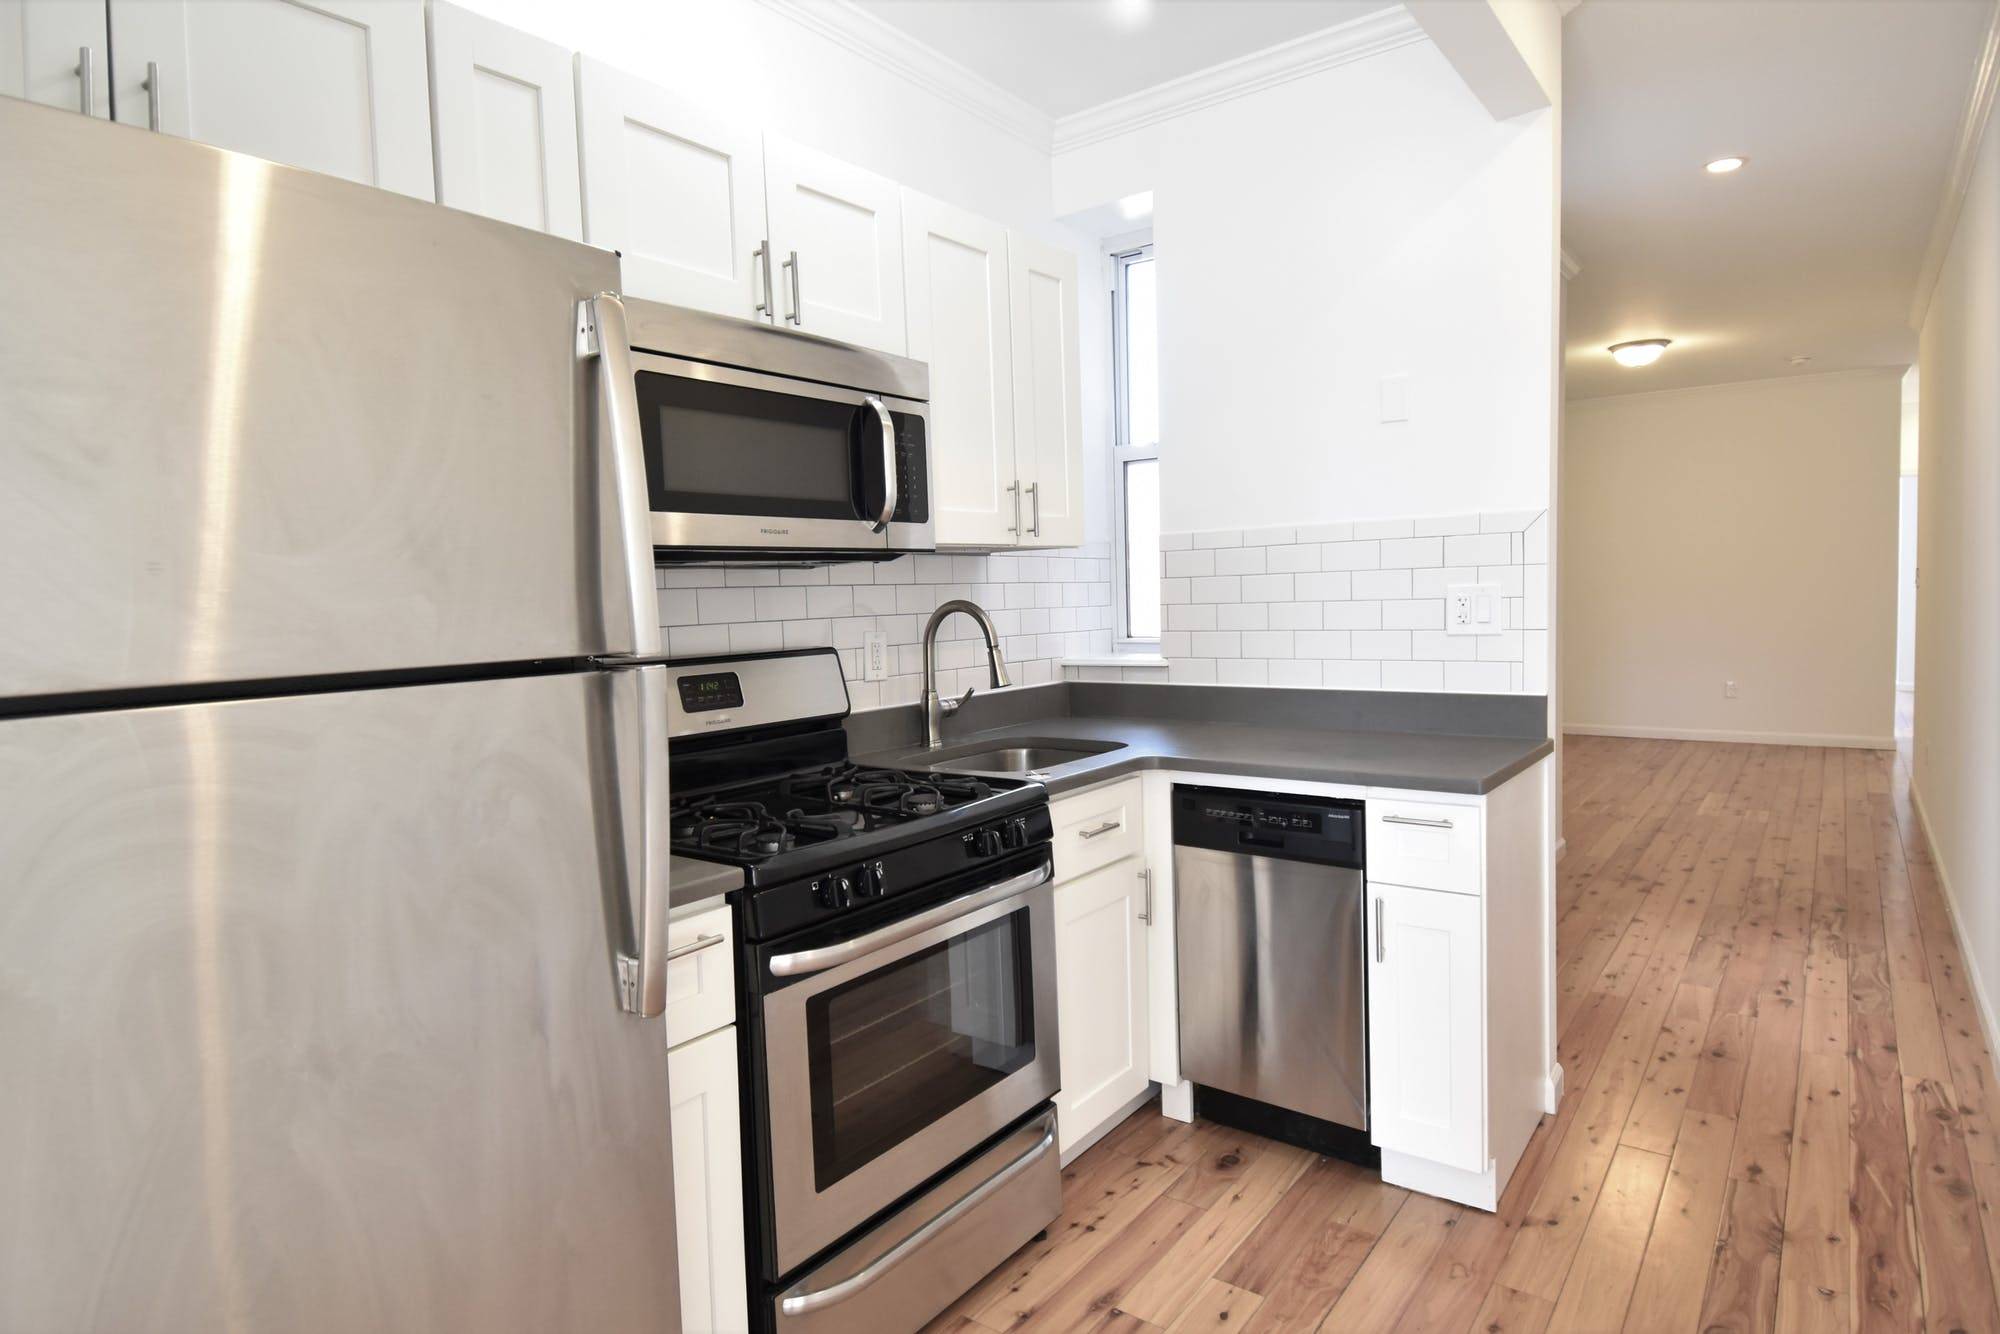 Welcome to 103 3rd Place in Carroll Gardens !